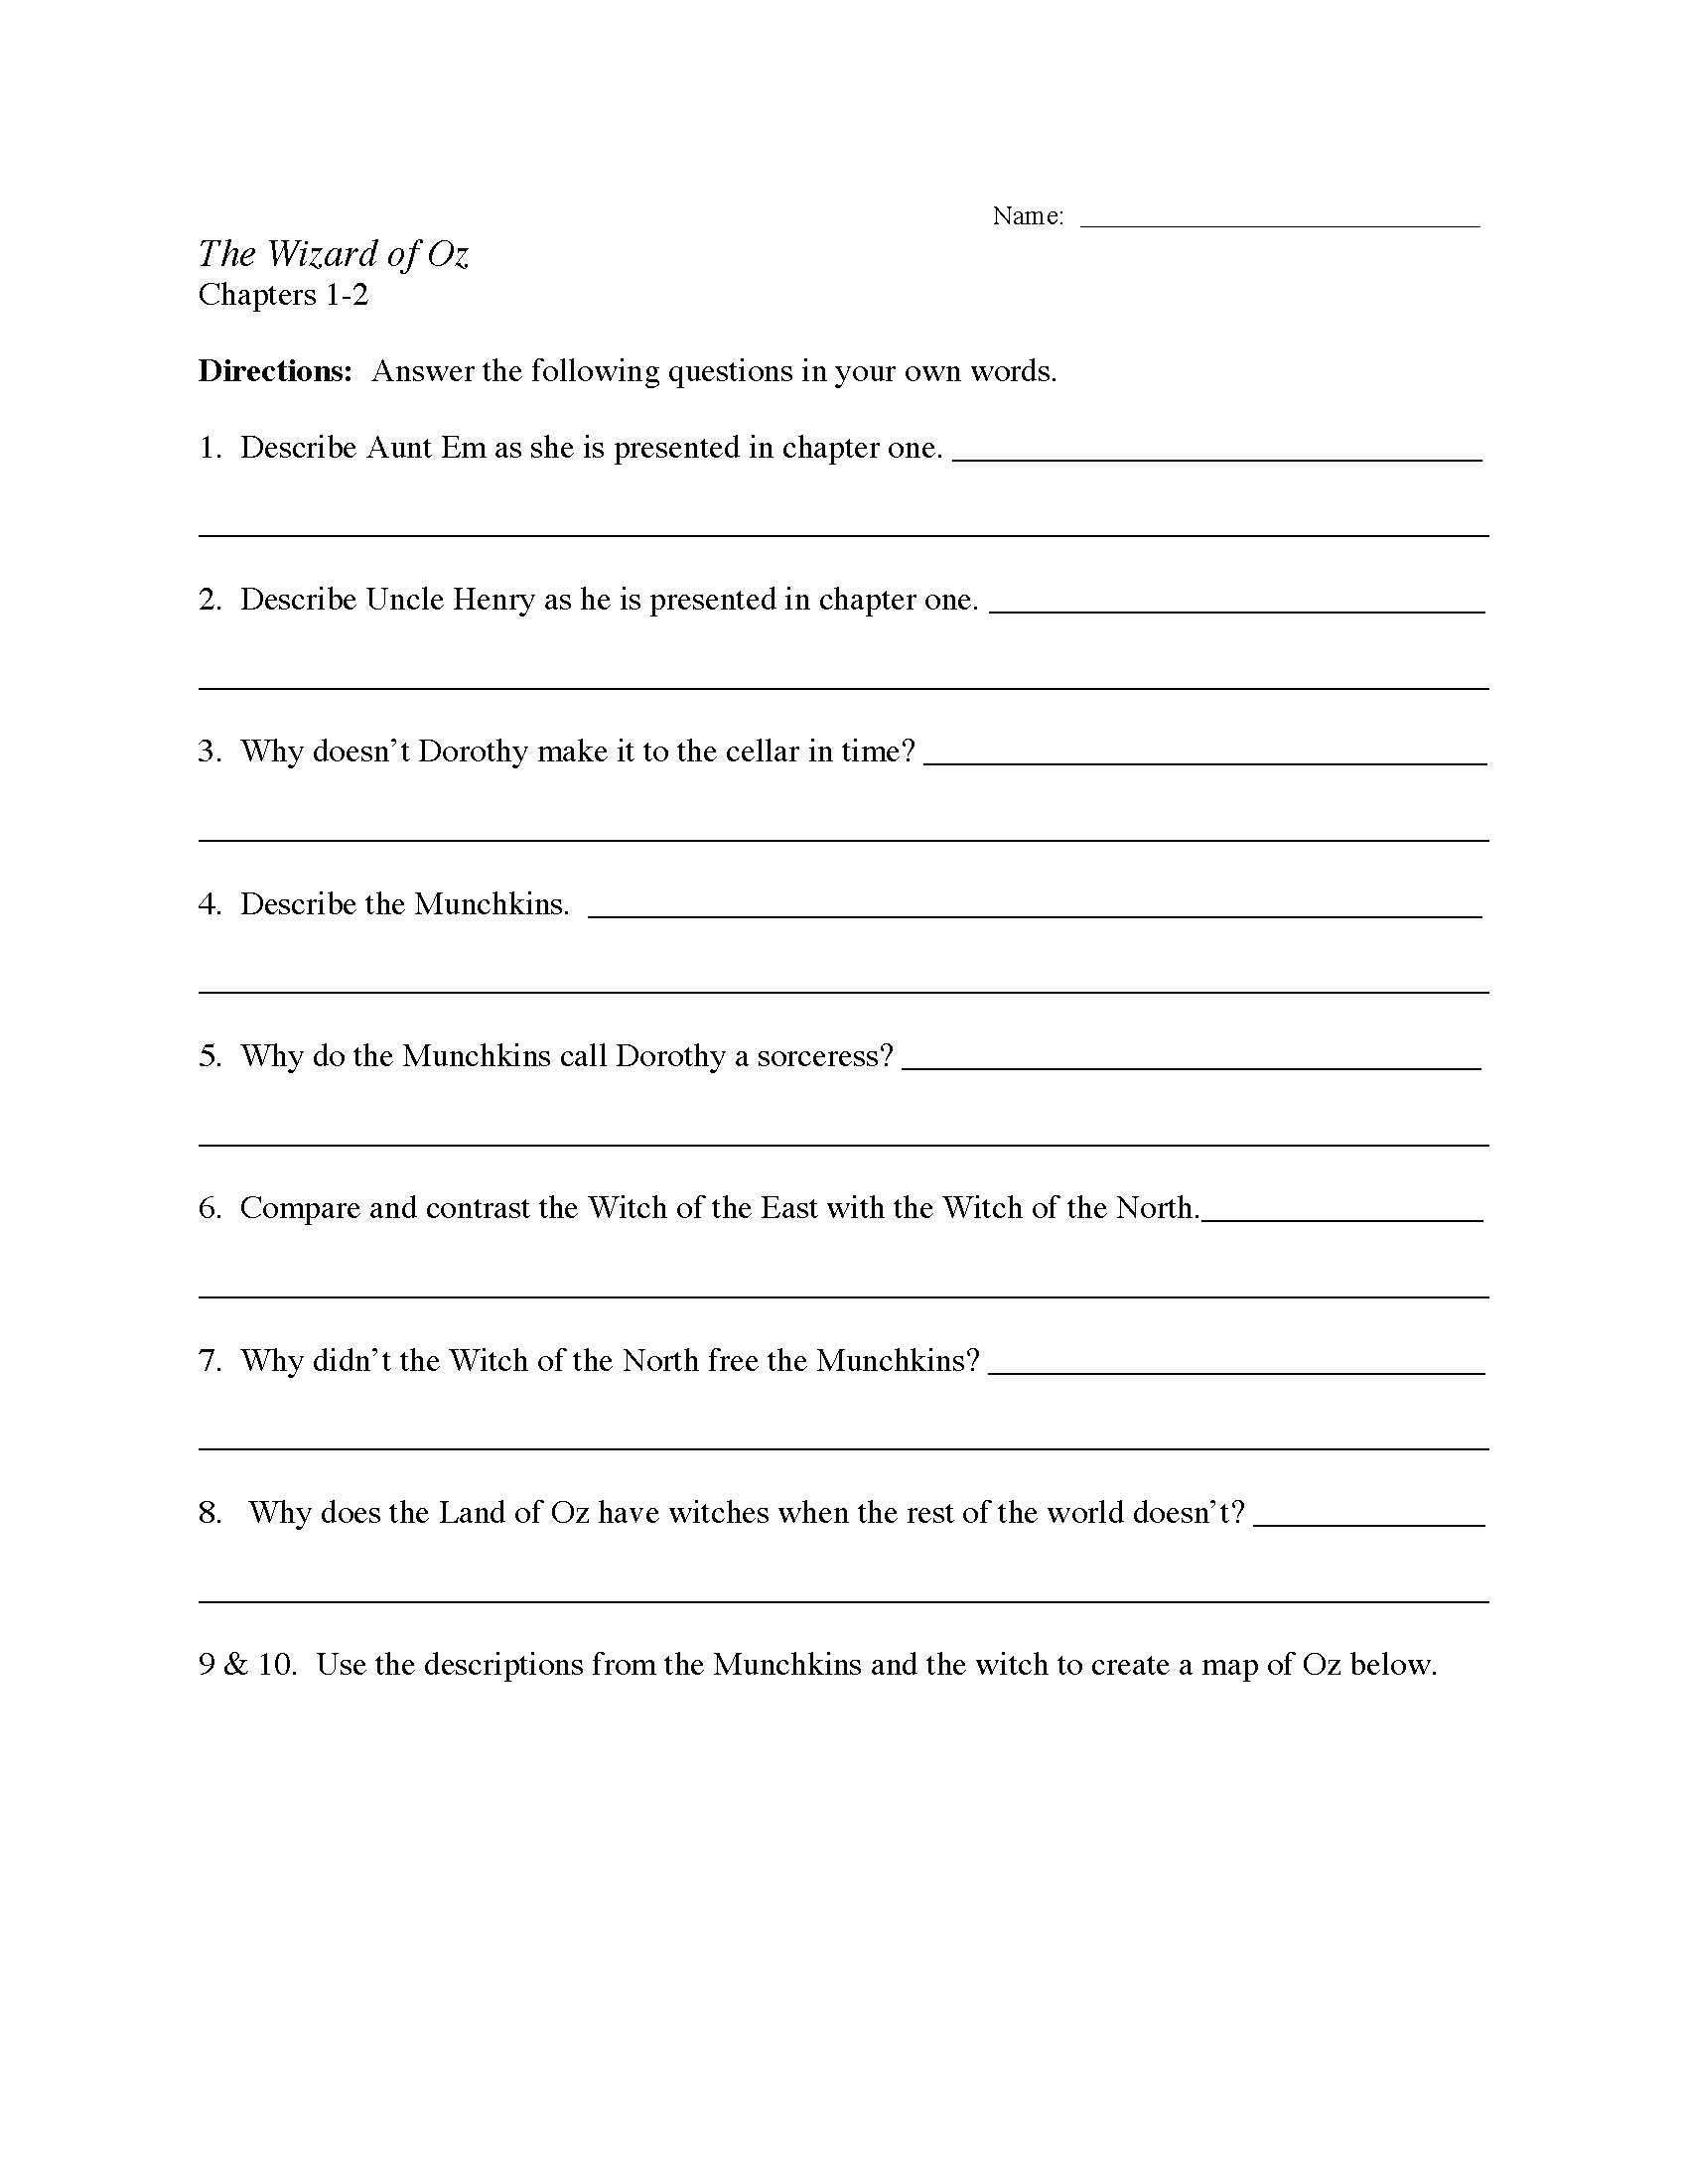 This is a preview image of the The Wizard of Oz Chapters 1-2 Worksheet.